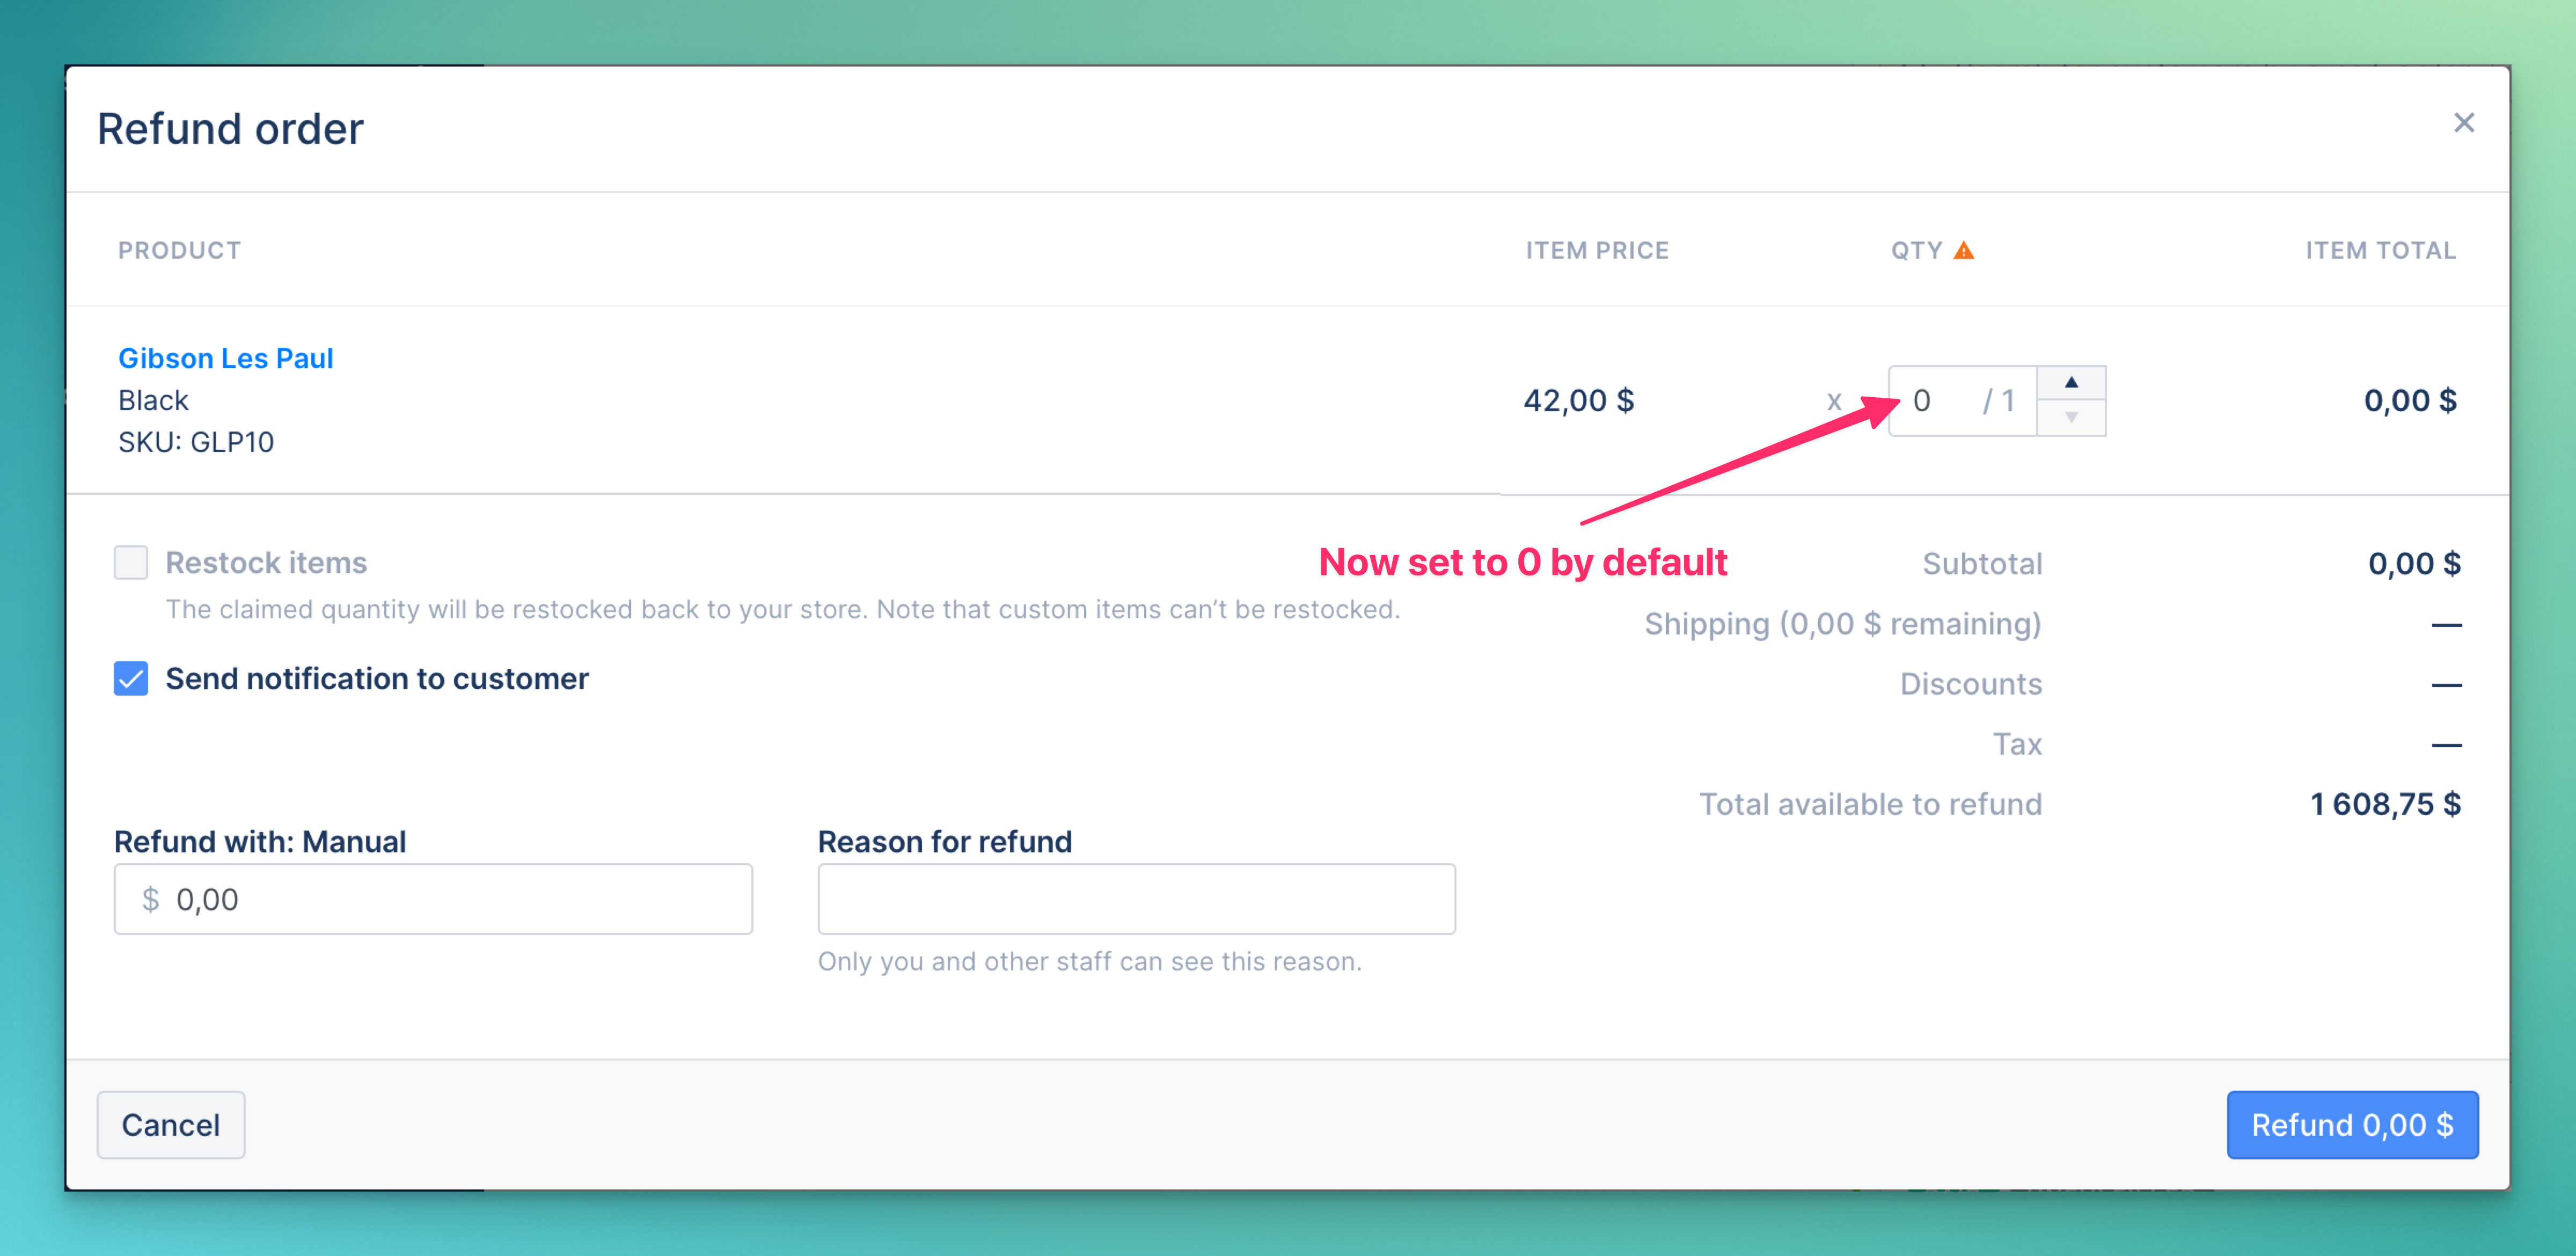 ðŸ’¸ Shopify Refund: default quantity is now set to 0